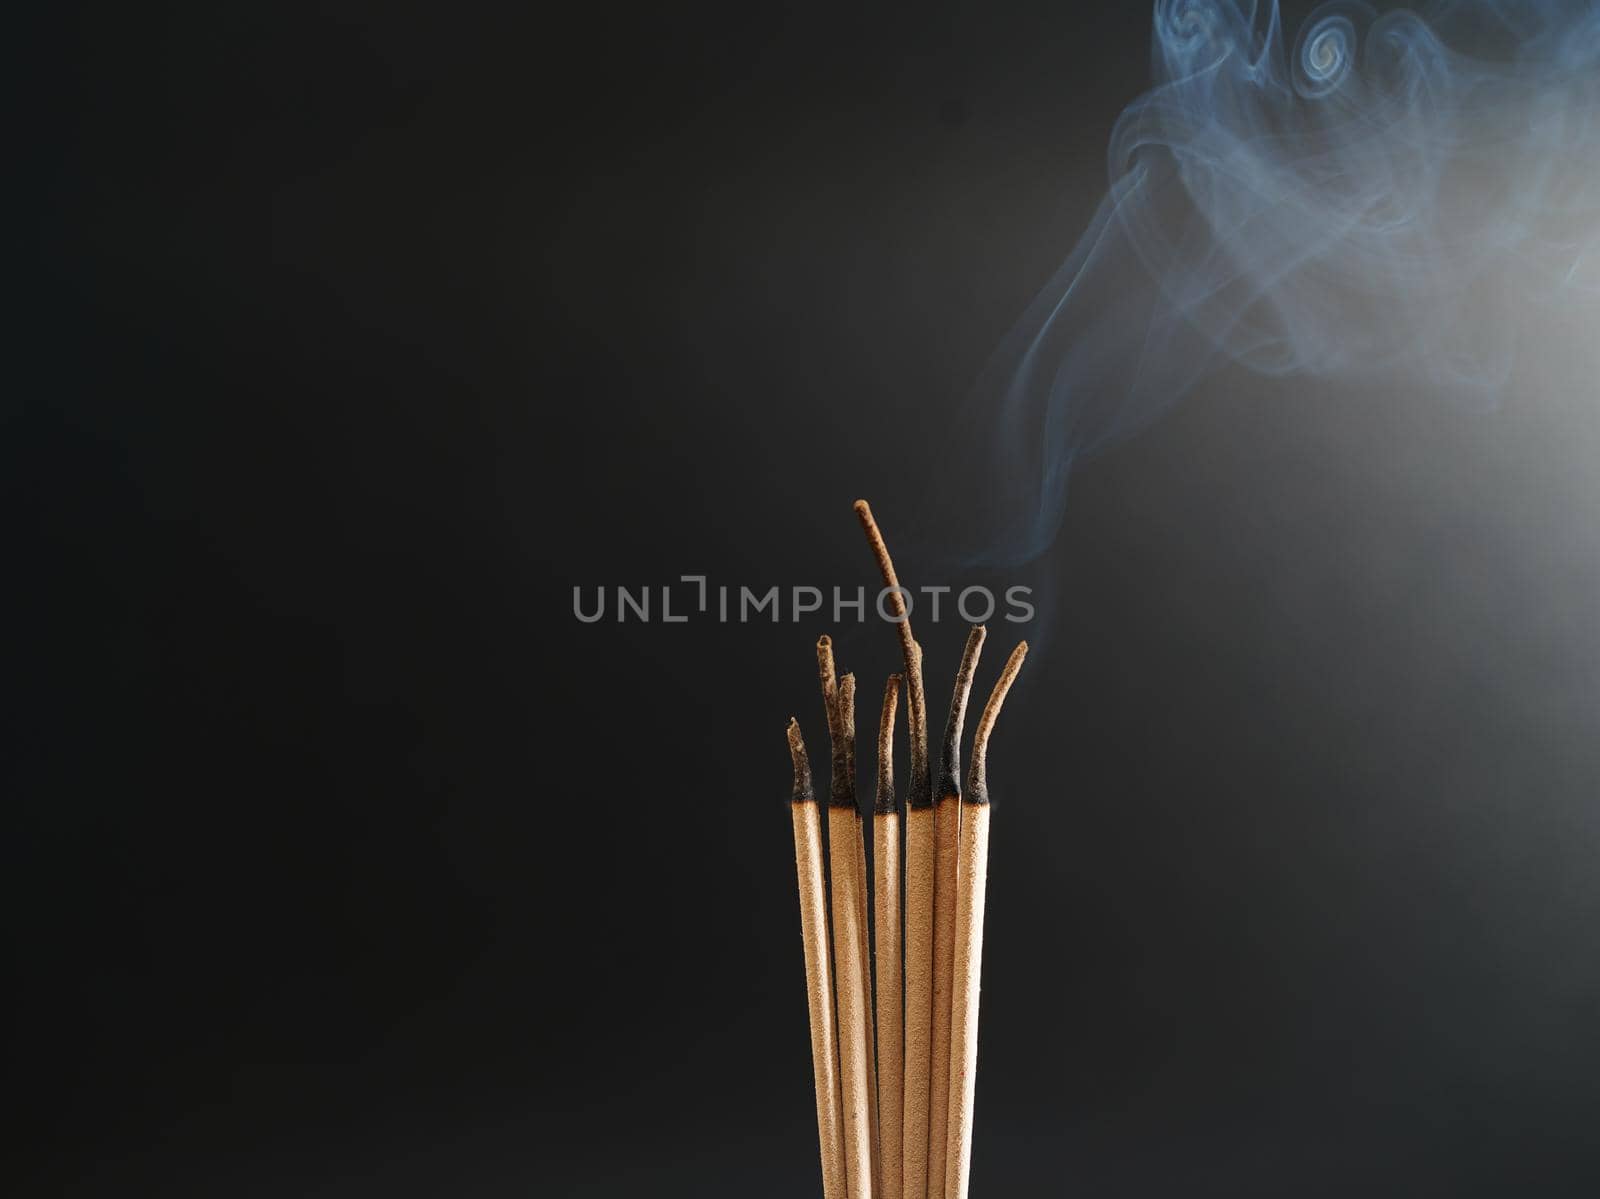 Burning incense white smoke black background used as a worship background image a sacred object of Buddhist beliefs focus on the smoke by noppha80